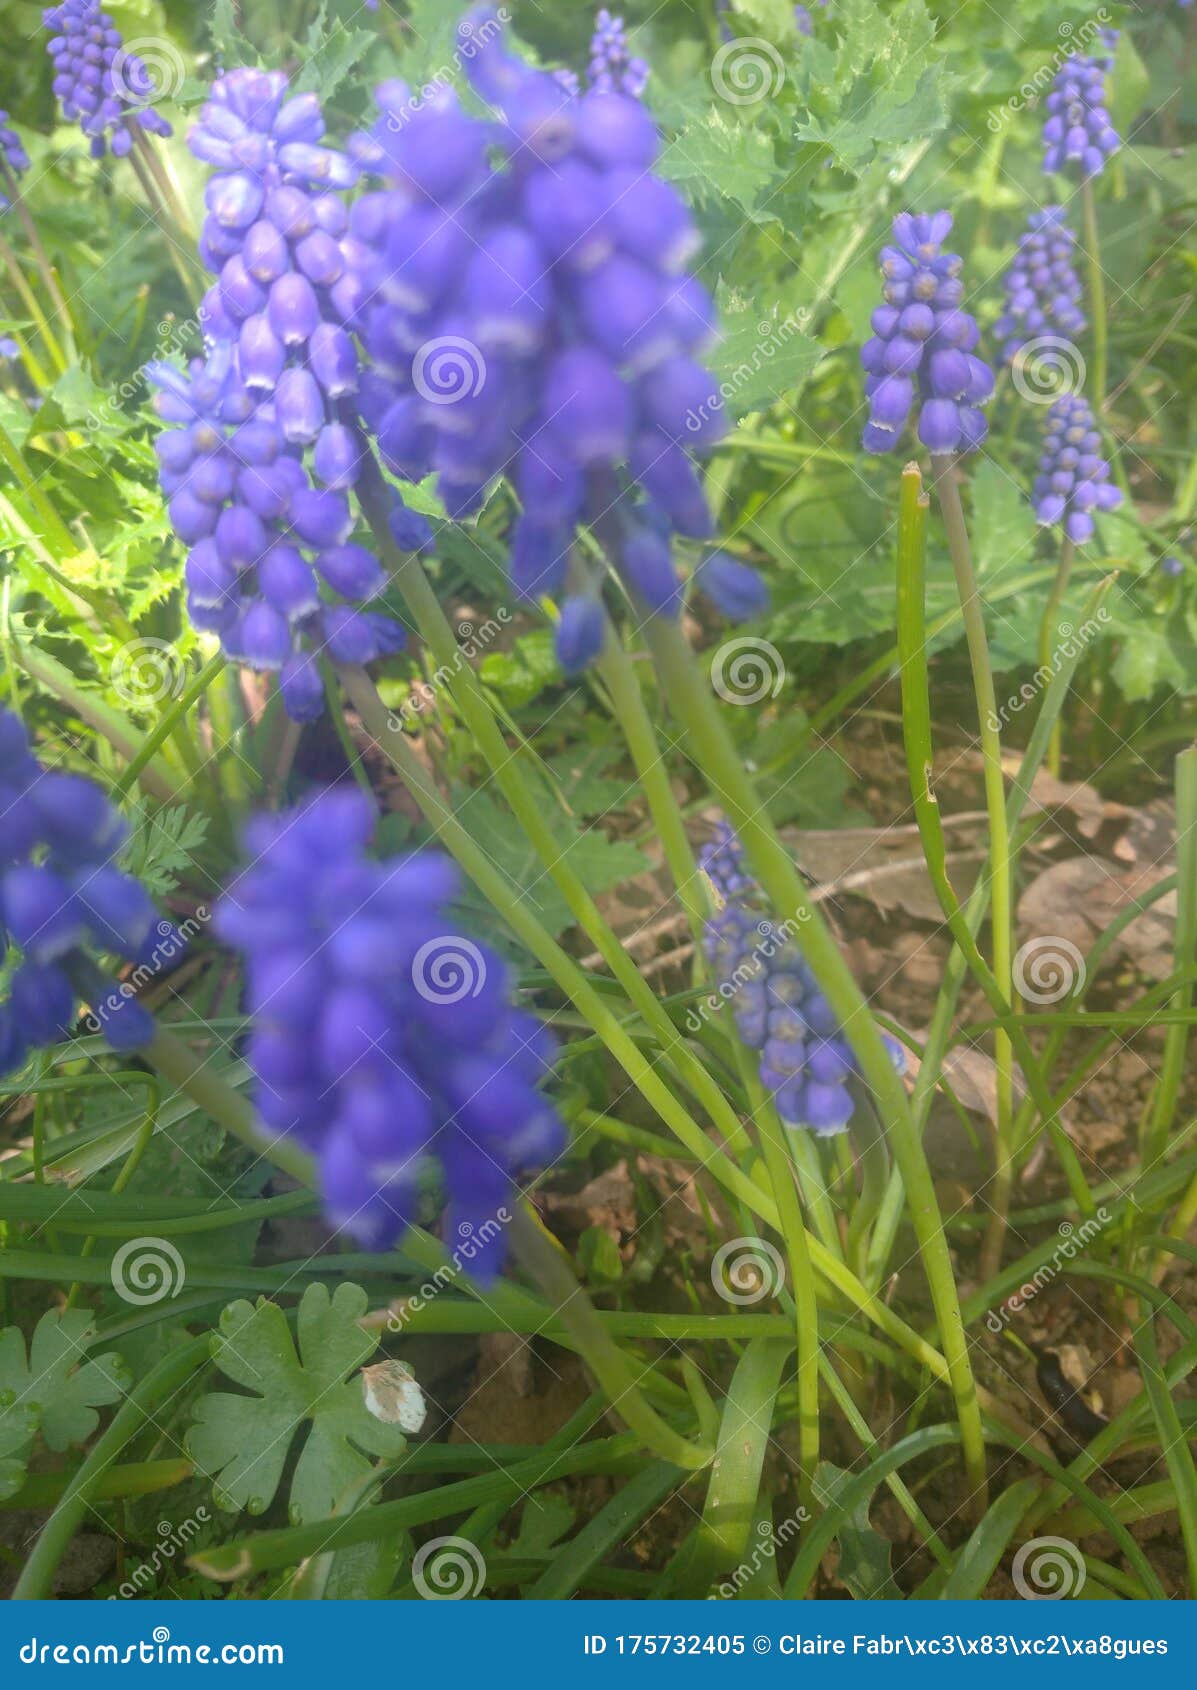 lot of muscari flowers in the garden